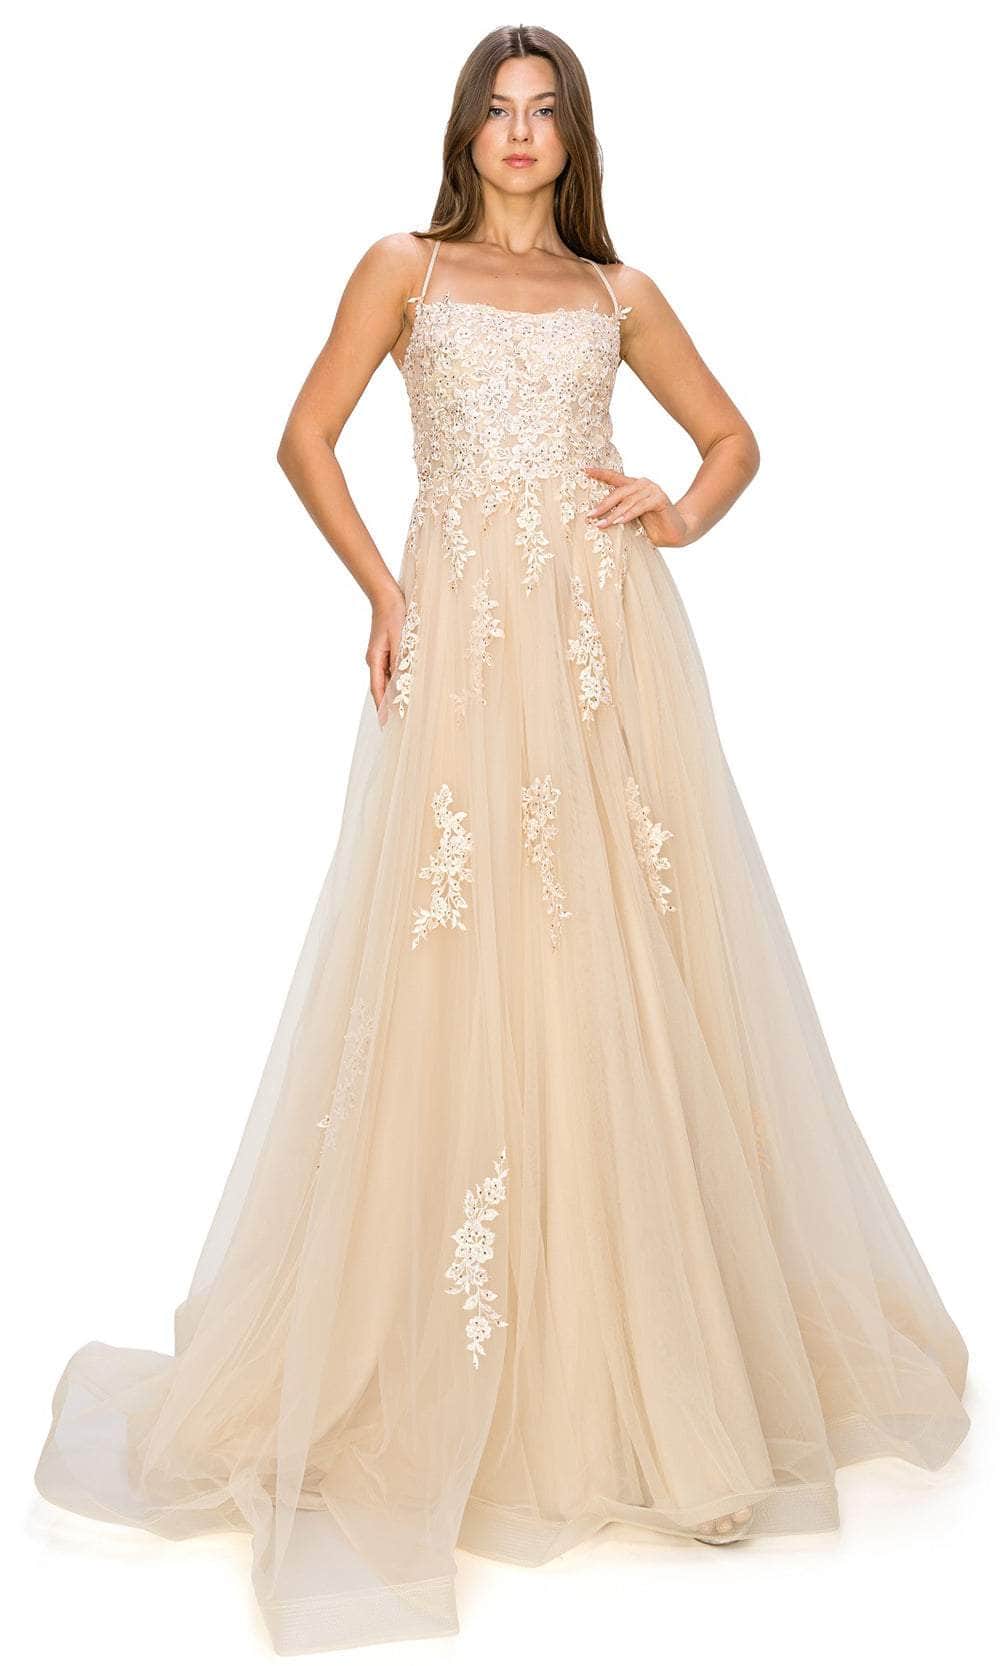 Cinderella Couture 8031J - Floral Embroidered Tulle Prom Gown
